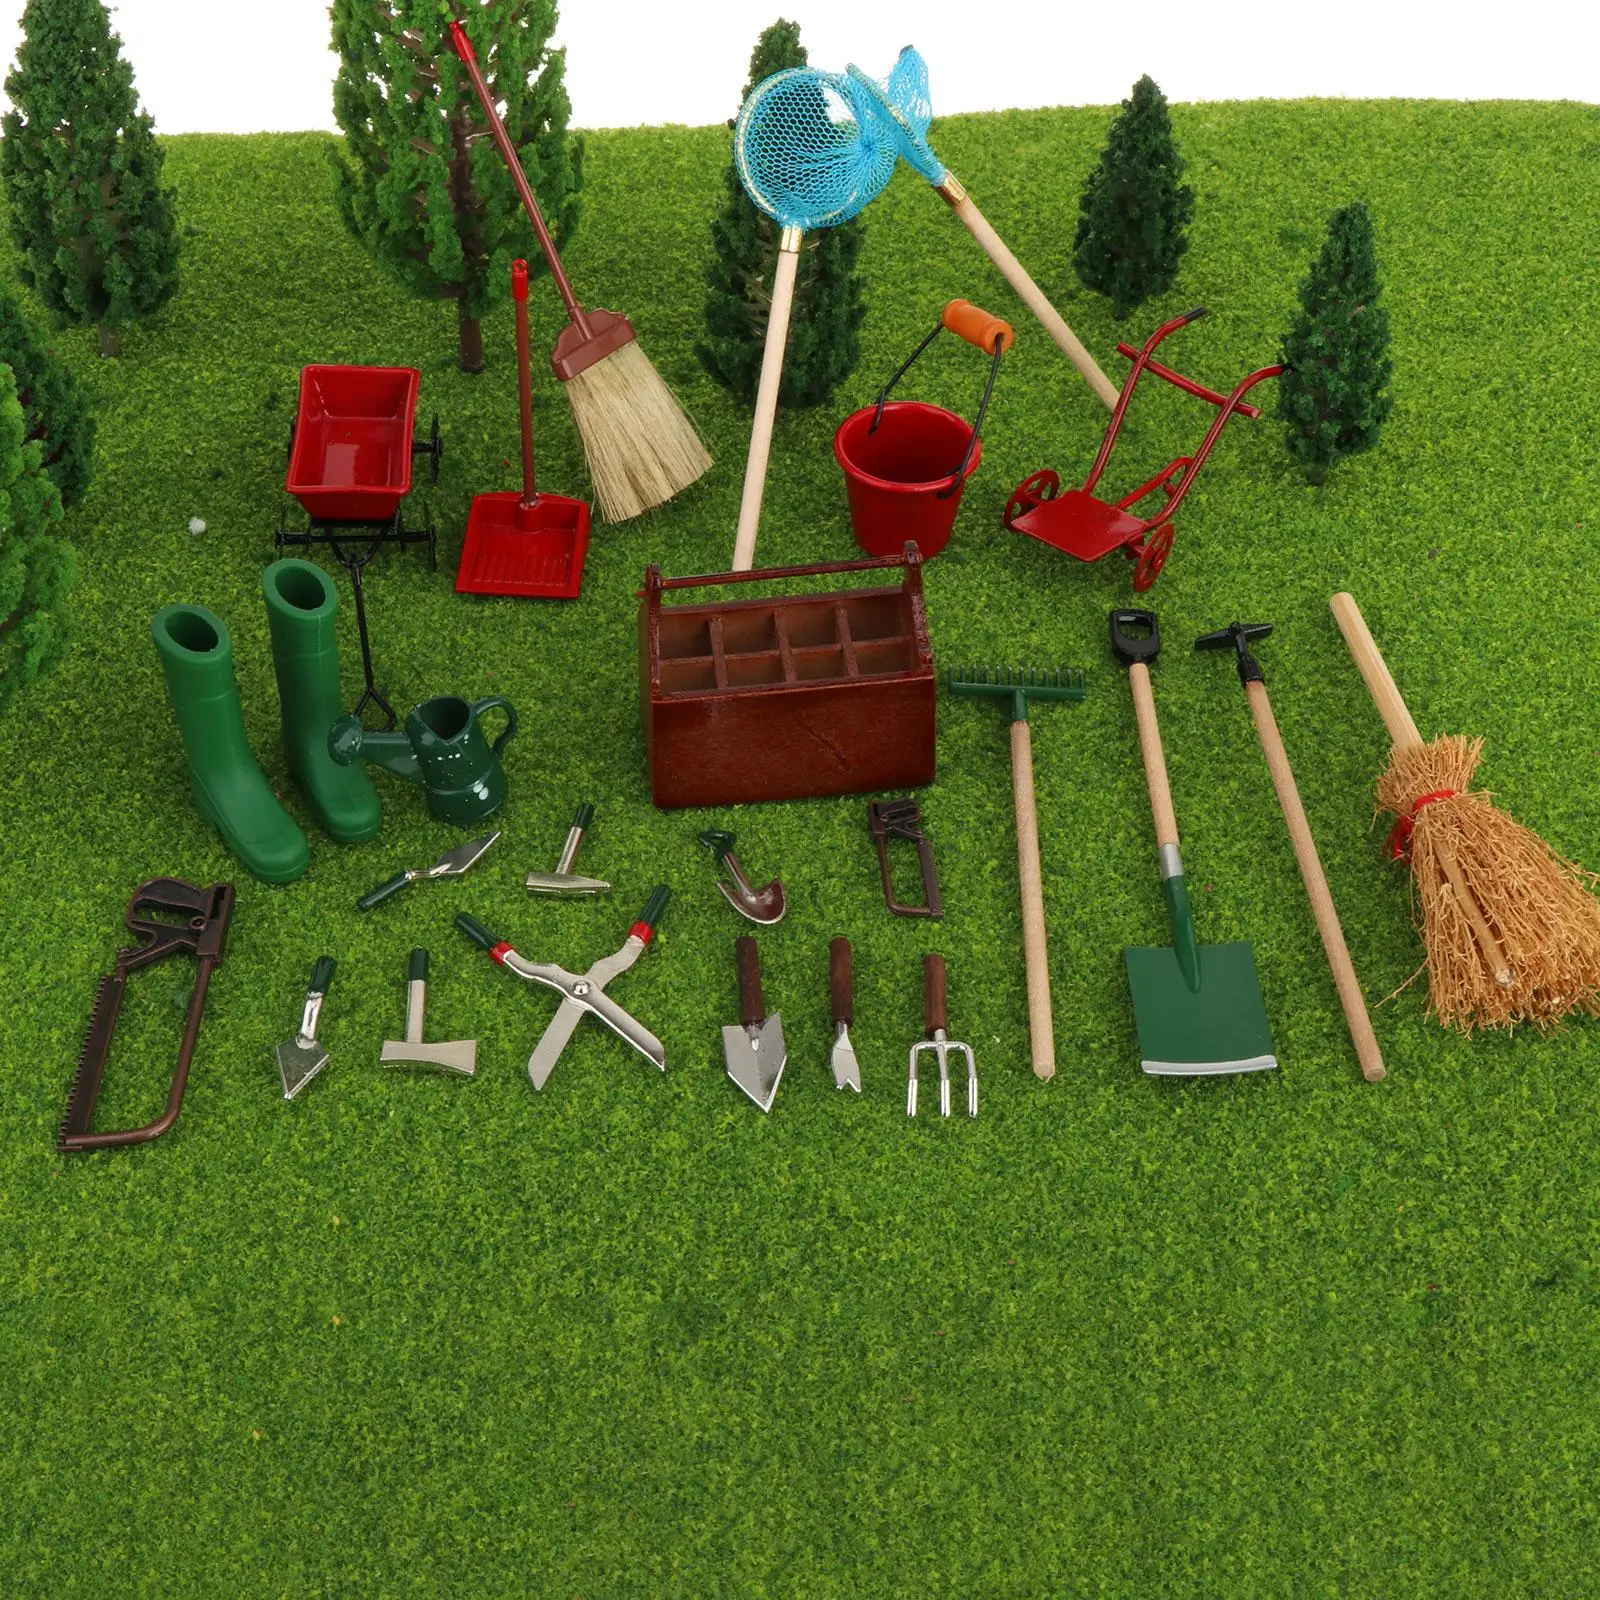 25 Pieces Miniature Garden Tools Kids Cleaning toy garden Tools Miniature Gardening Tools for Shop Dollhouse Accessories Age 3+